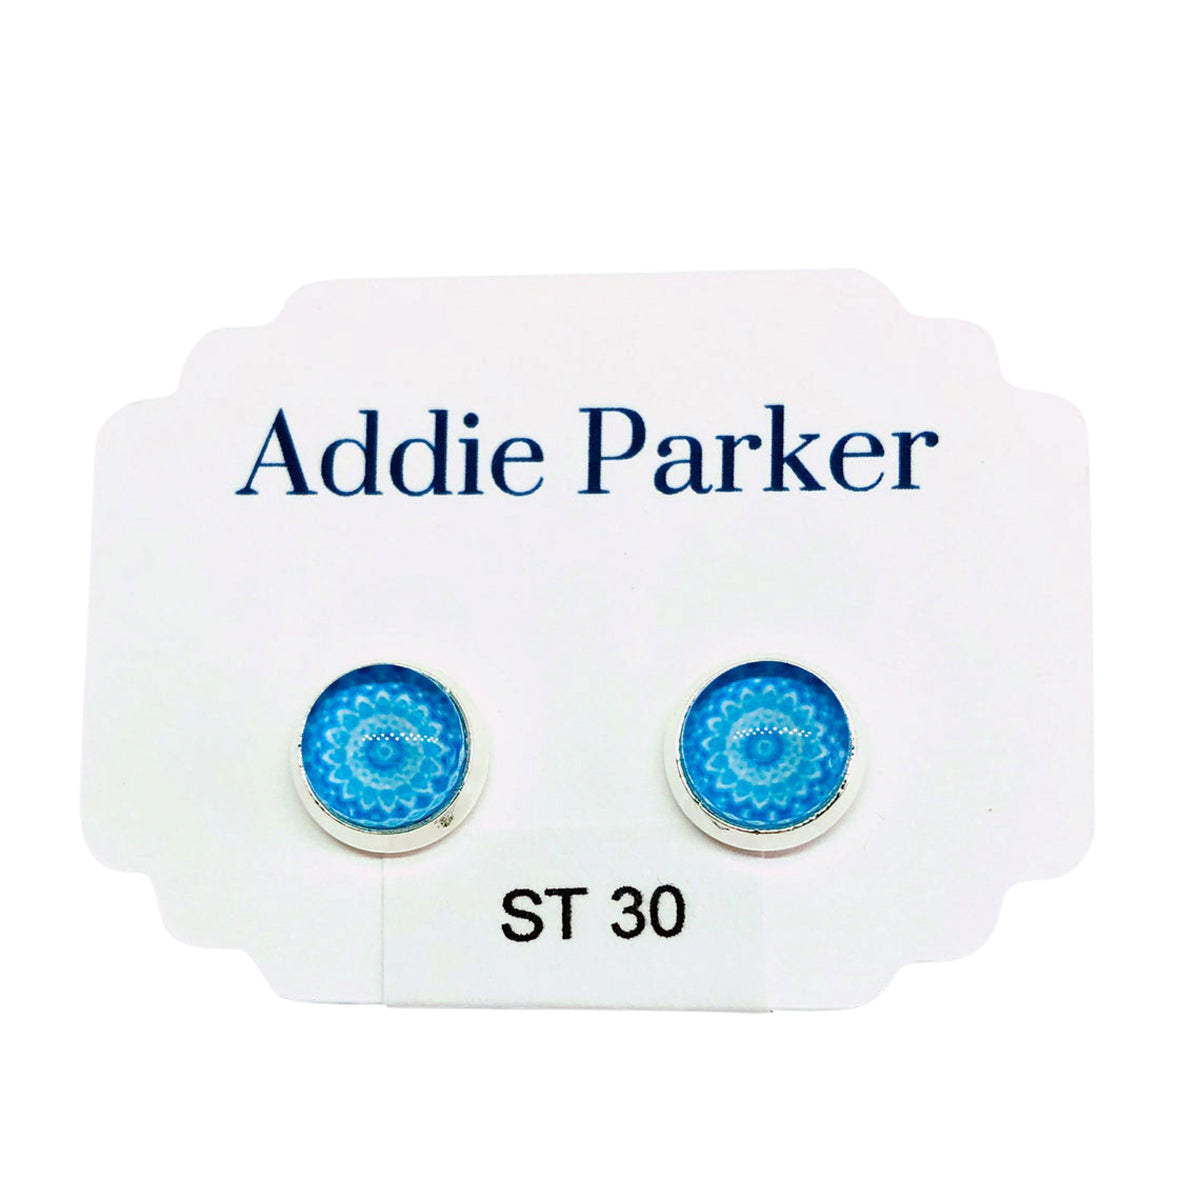 ADDIE PARKER STUD EARRINGS BLUE MANDALA with a lever back closure displayed on a white earring card labeled "Addie Parker.